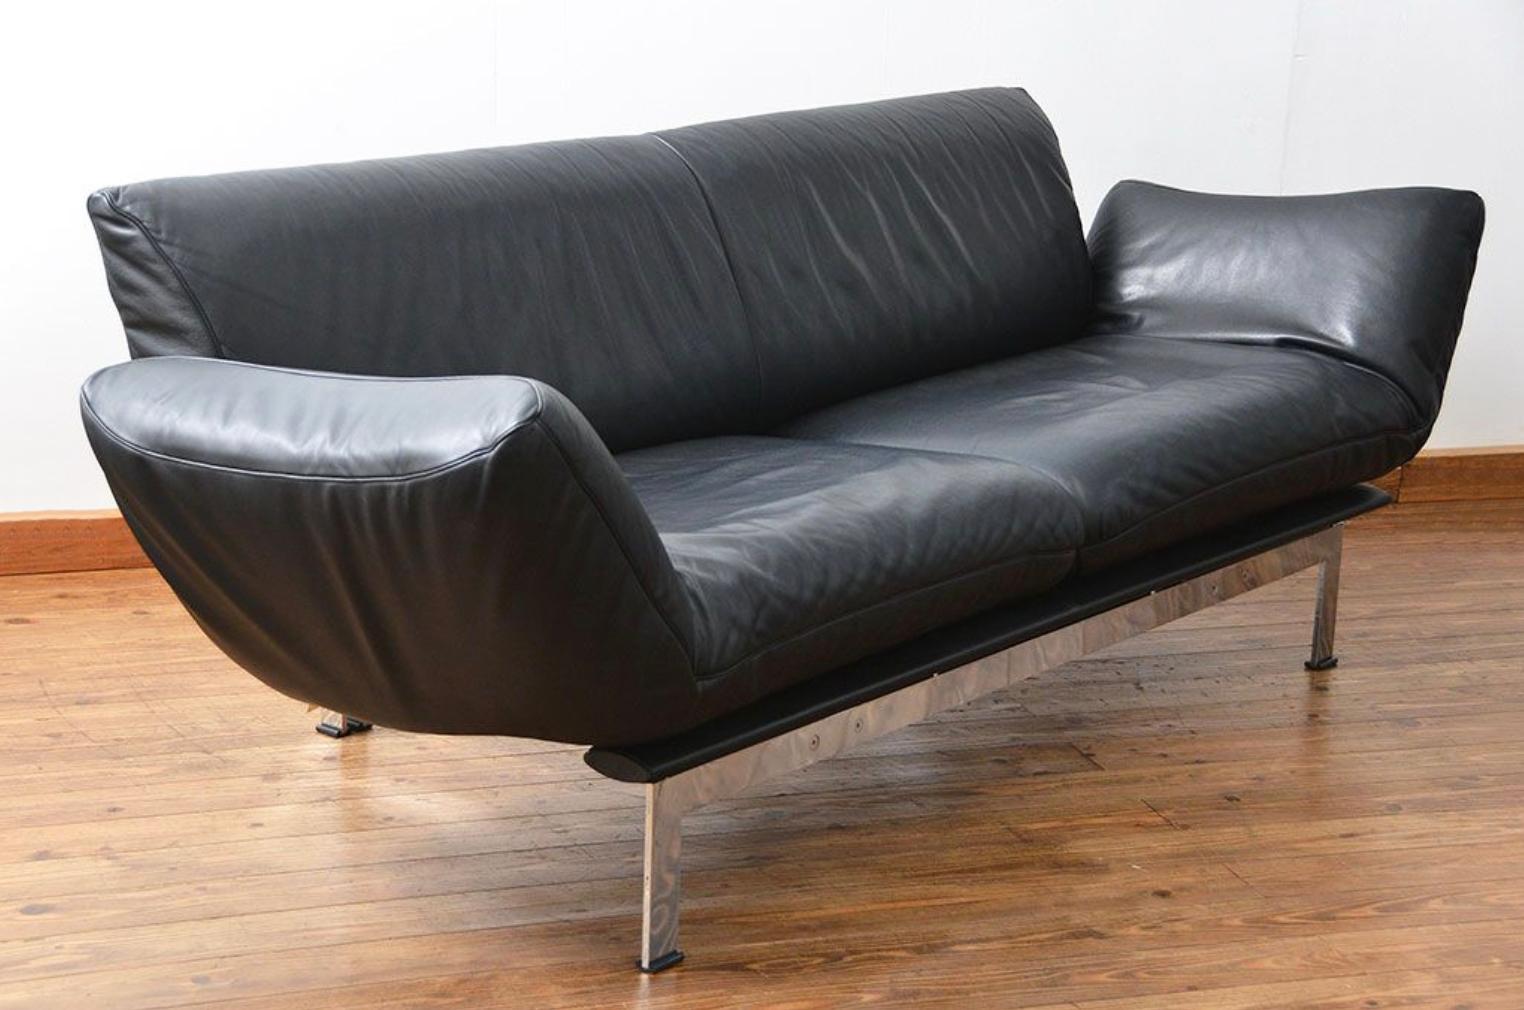 Postmodern 80s Convertible Black Leather + Chrome DeSede Ds140 Sofa Reto Frigg For Sale 2